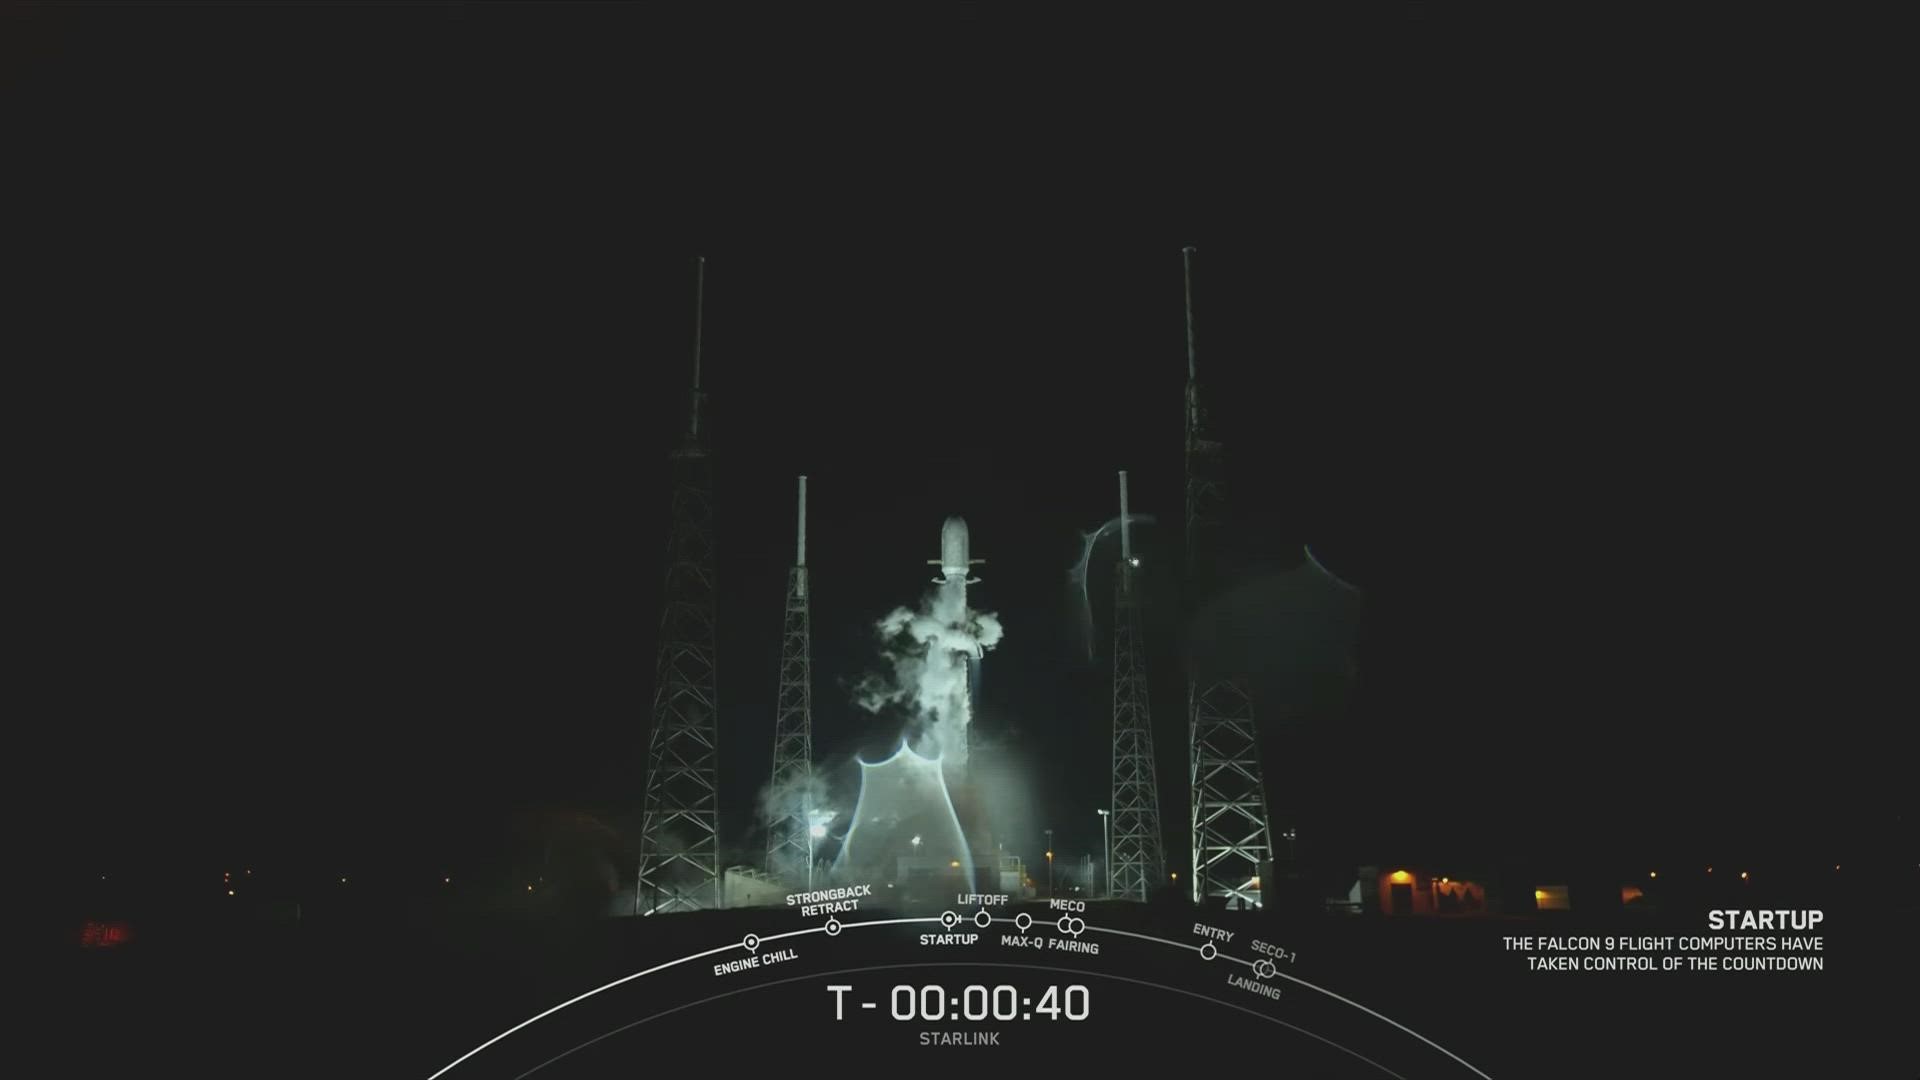 The spacecraft company is now targeting a 9:05 p.m. launch window Friday, Sept. 16.